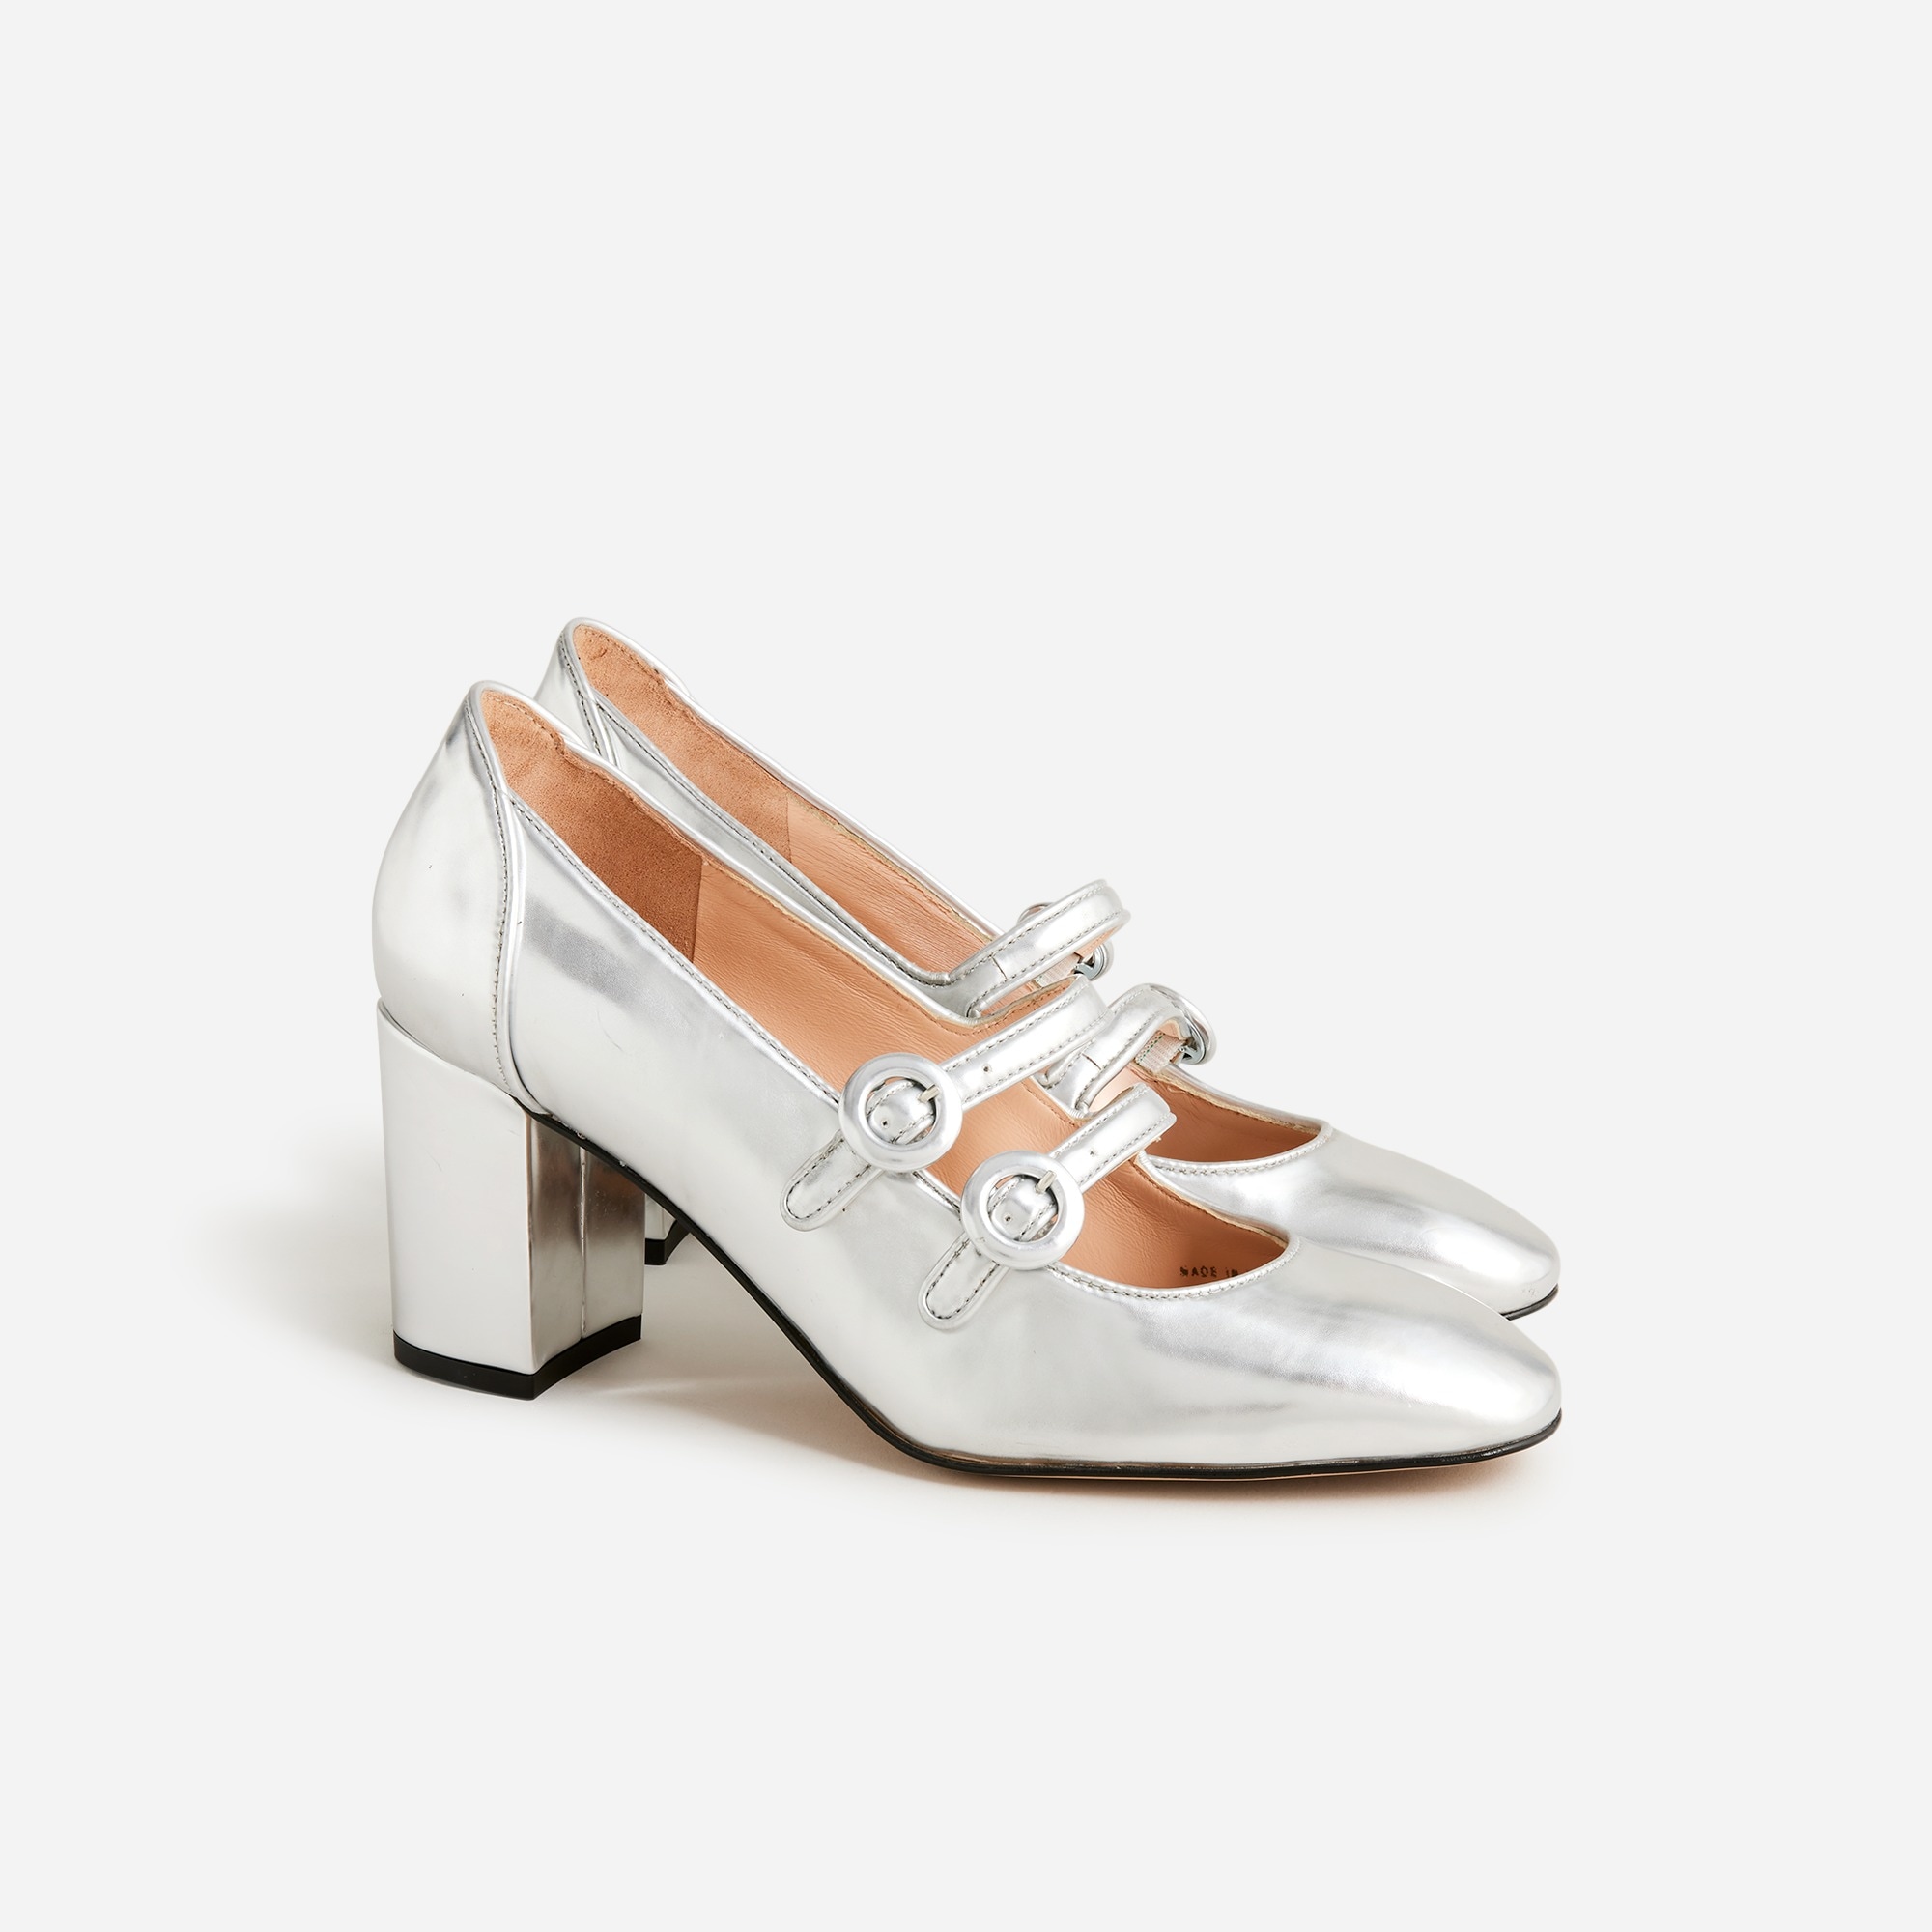 womens Maisie double-strap heels in metallic leather